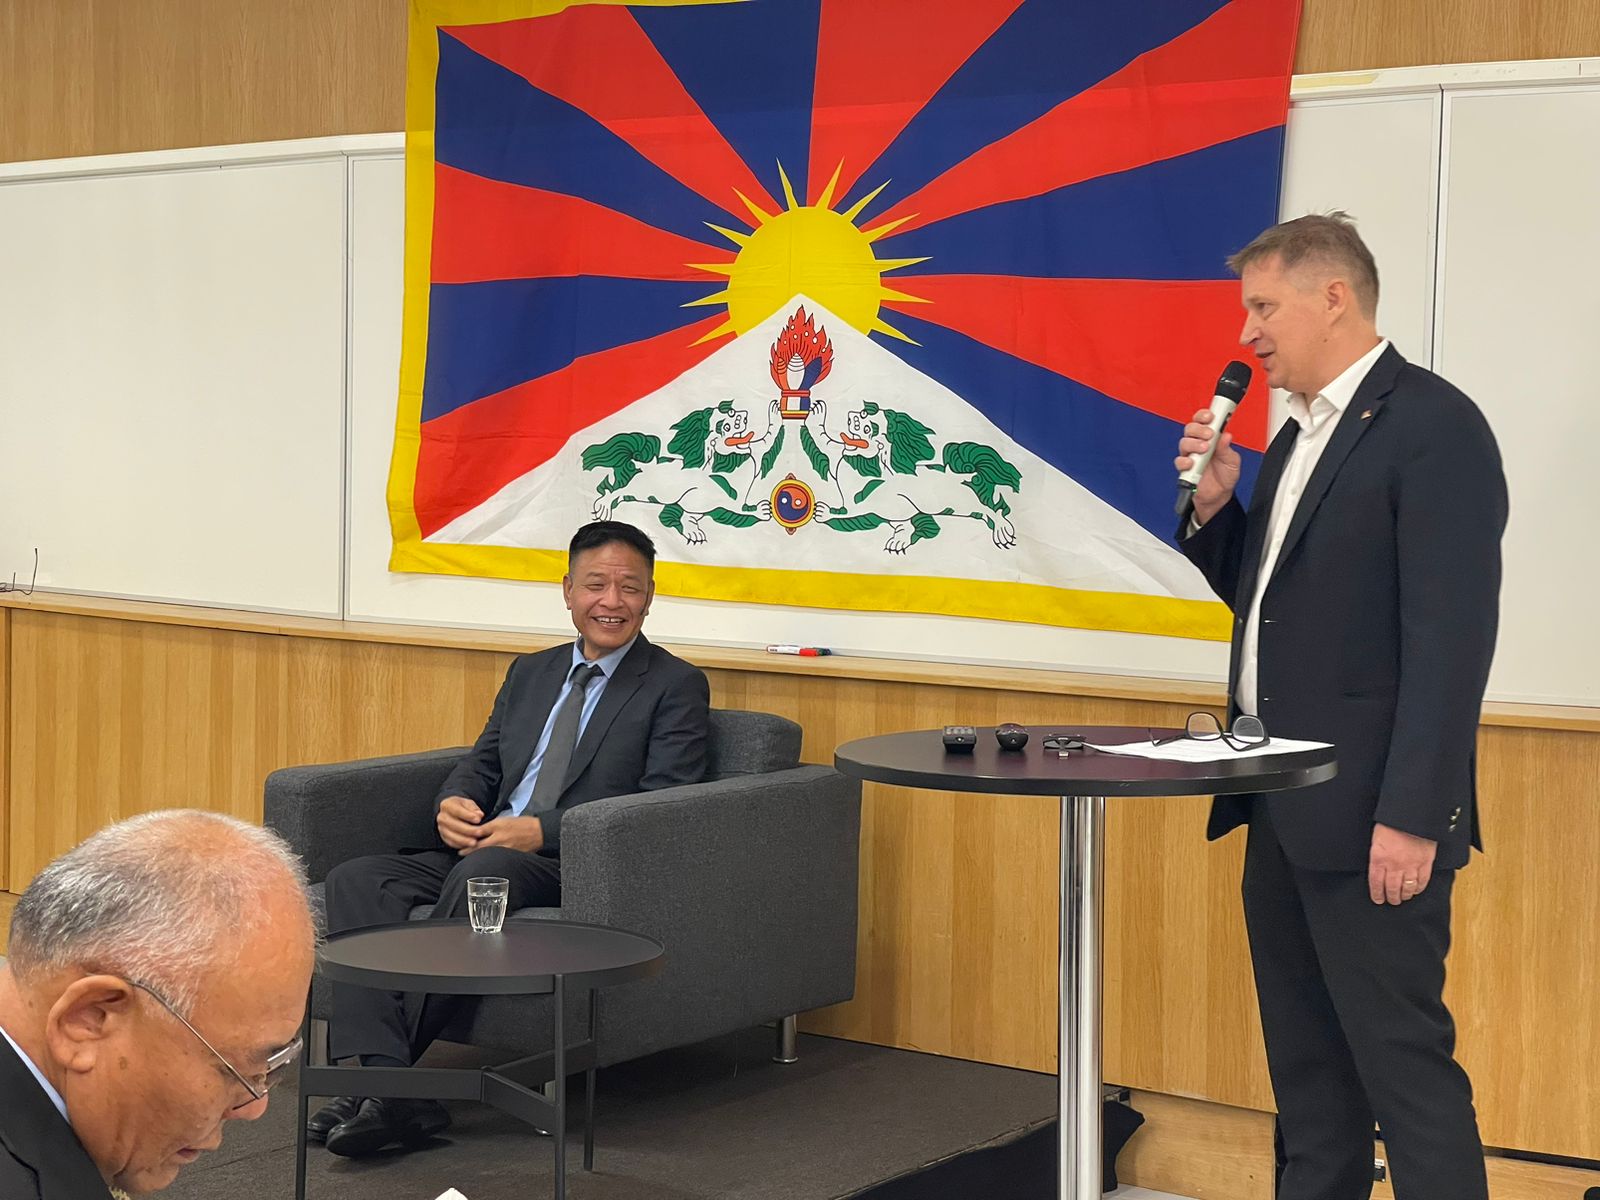 Sikyong Penpa Tsering meeting with Swedish Tibet Committee; Session moderated by Mattias Bjornerstedt, President, Swedish Tibet Committee. 